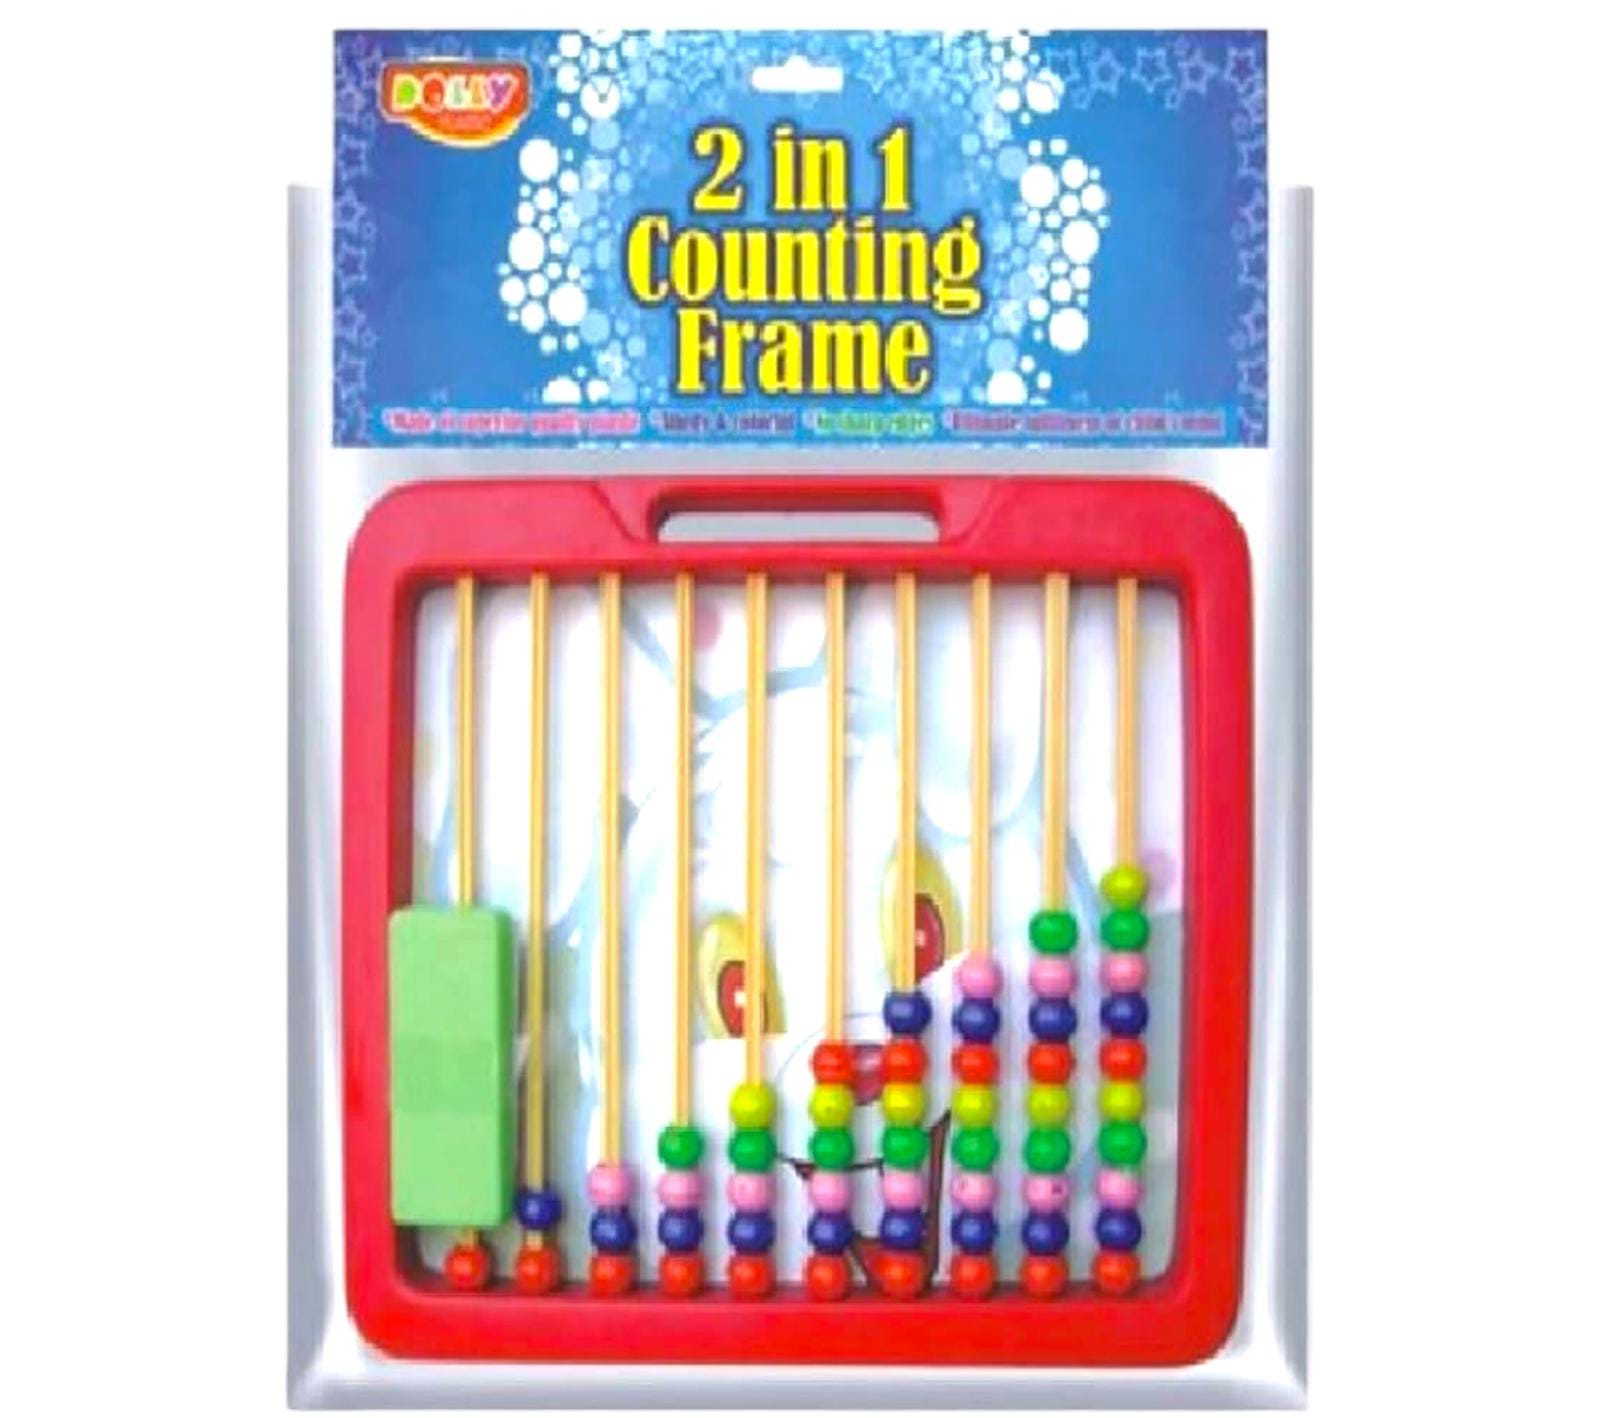 Counting Frame